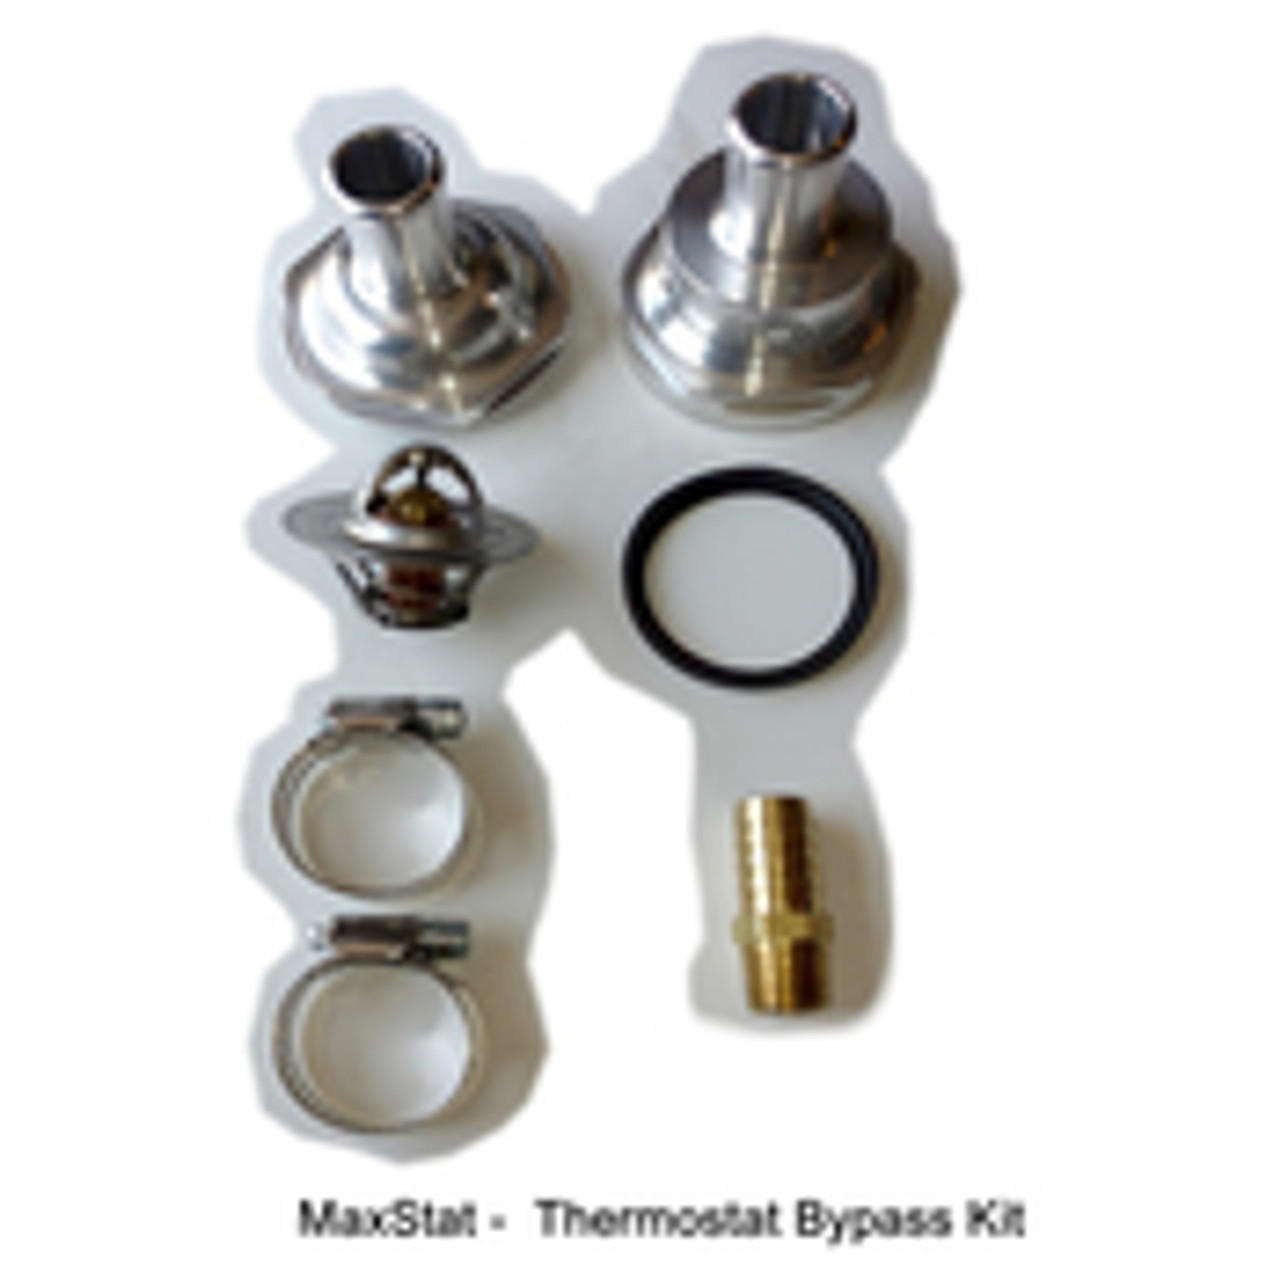 When ordered as a standalone kit, the MaxStat includes additional hardware to complete the installation.     The MaxStat can be installed with virtually all heater kits on the market and can be done at any time.  The best part is you don't have remove the OEM thermostat which can take hours depending on the engine.